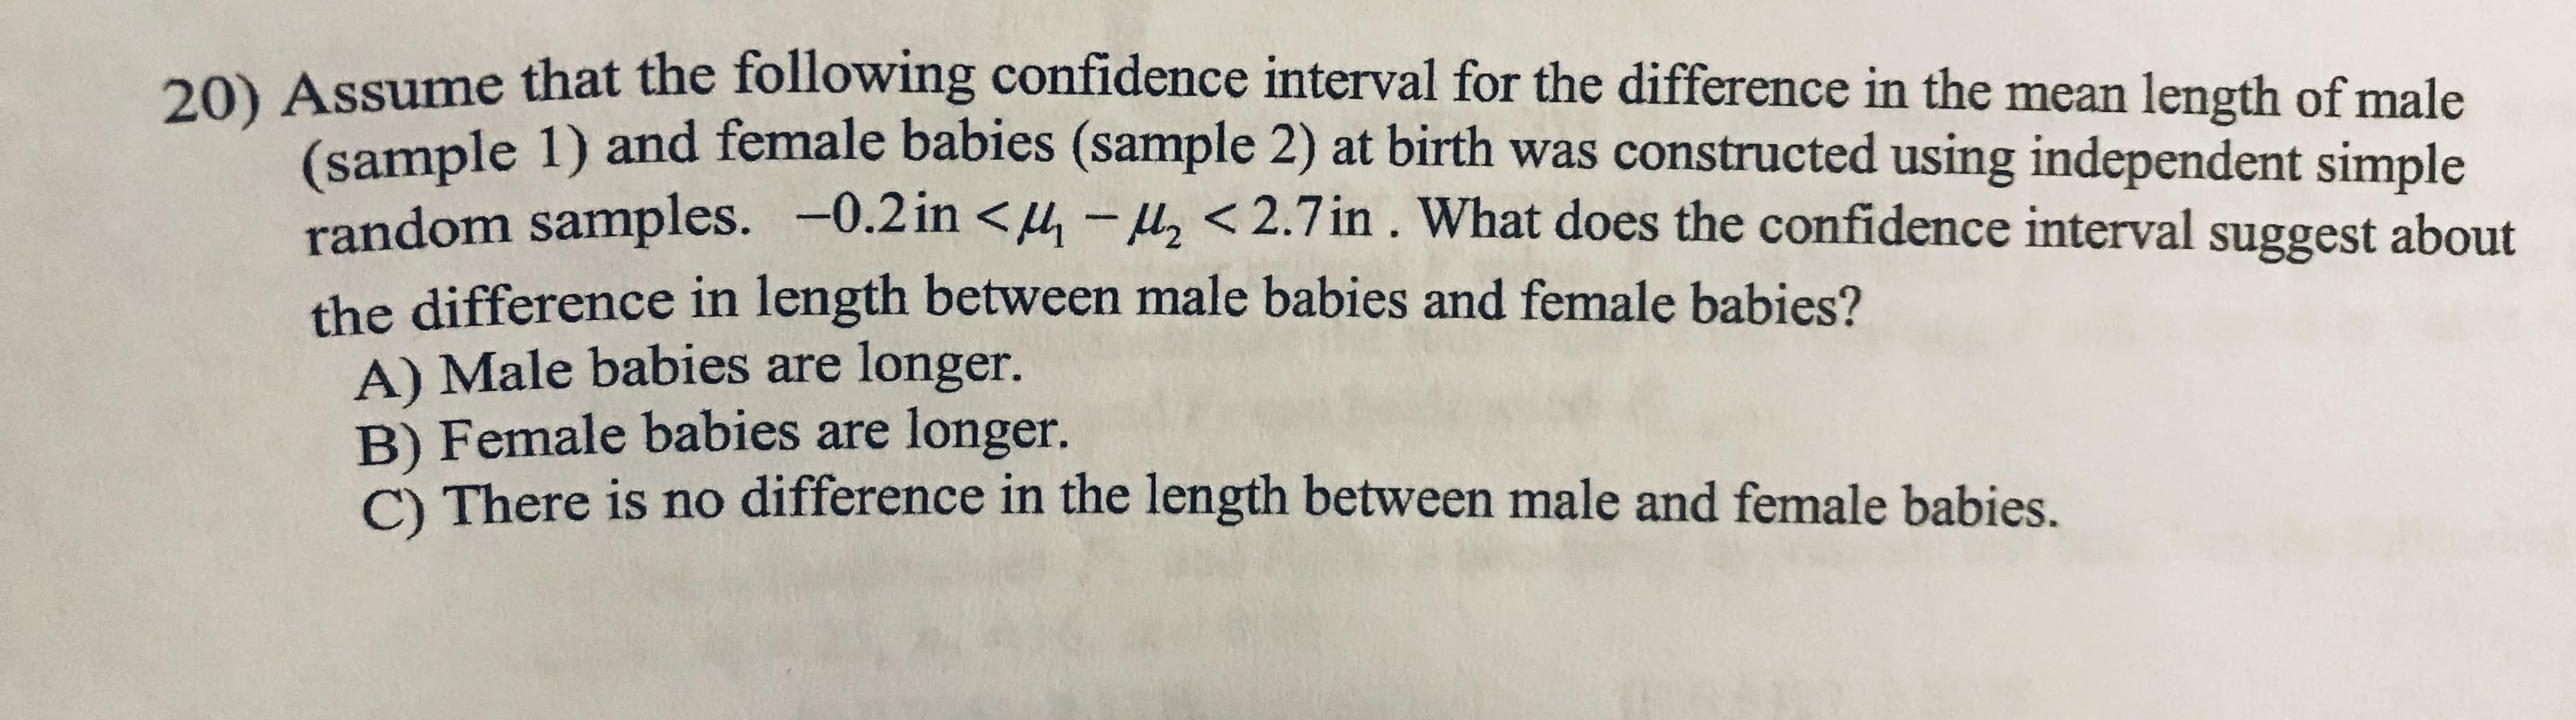 20) Assume that the following confidence interval for the difference in the mean length of male
(sample 1) and female babies (sample 2) at birth was constructed using independent simple
random samples. -0.2in <4-z<2.7in. What does the confidence interval suggest about
the difference in length between male babies and female babies?
A) Male babies are longer.
B) Female babies are longer.
C) There is no difference in the length between male and female babies.
